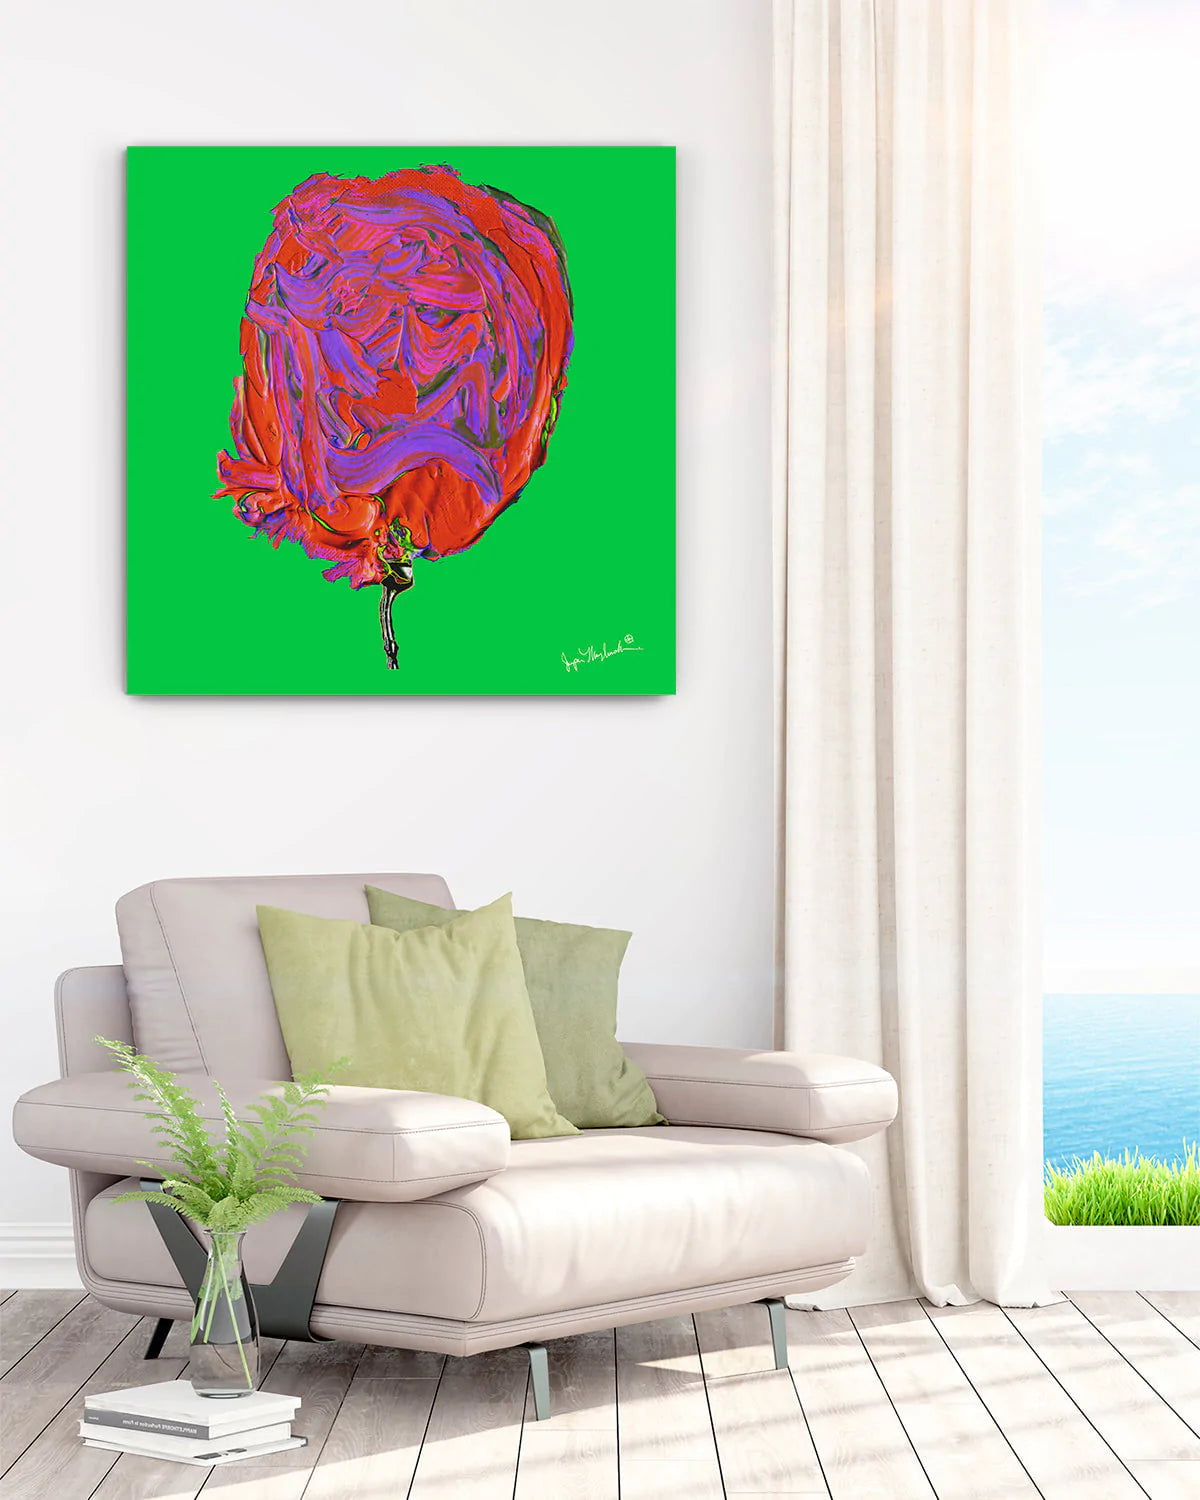 Original Print Cosmic Strawberry Cotton Candy by Jumper Maybach 2